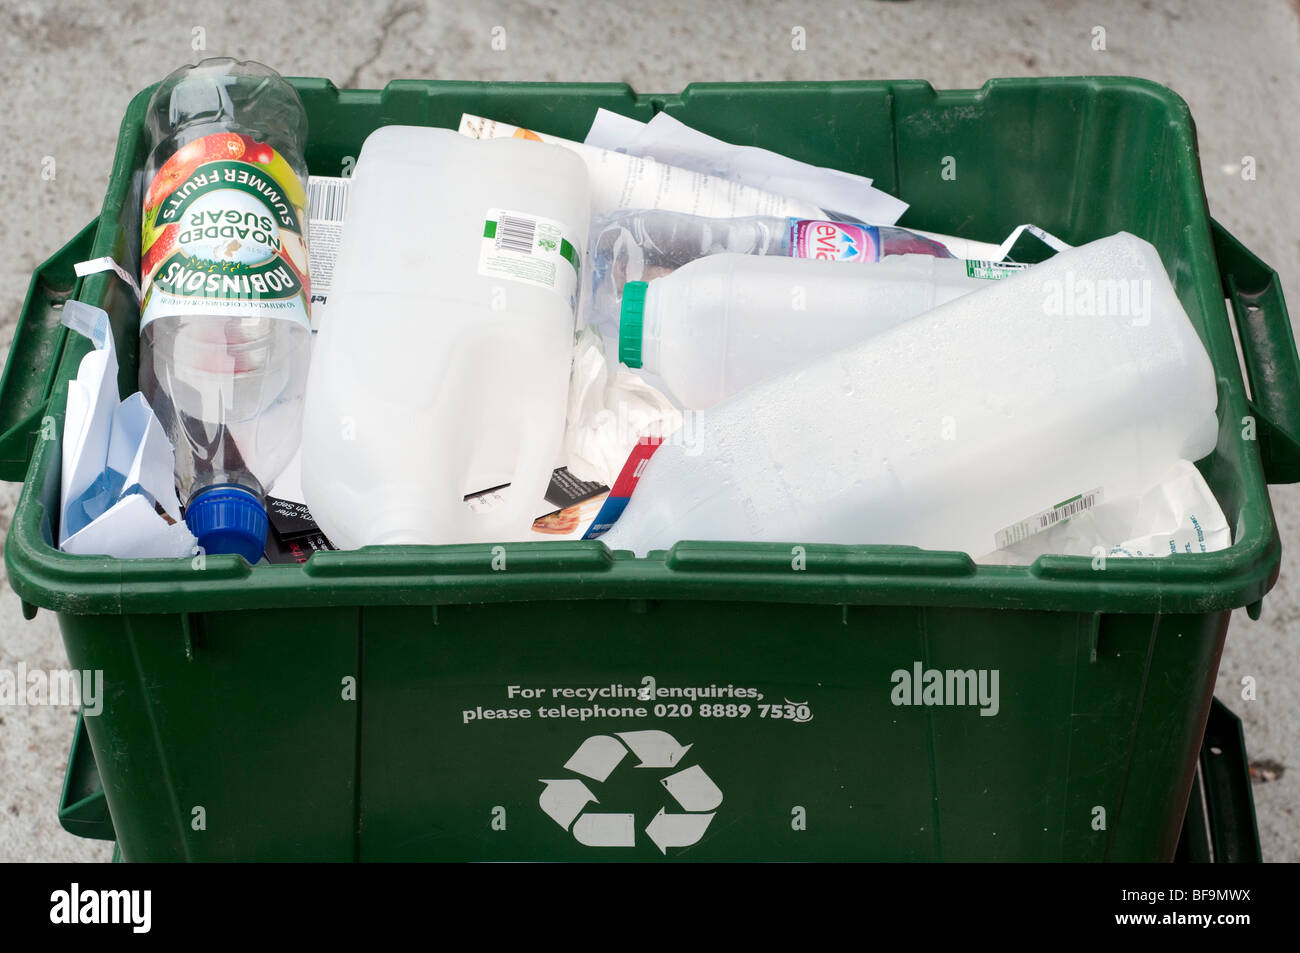 Residential recycling box, London, England, UK Stock Photo